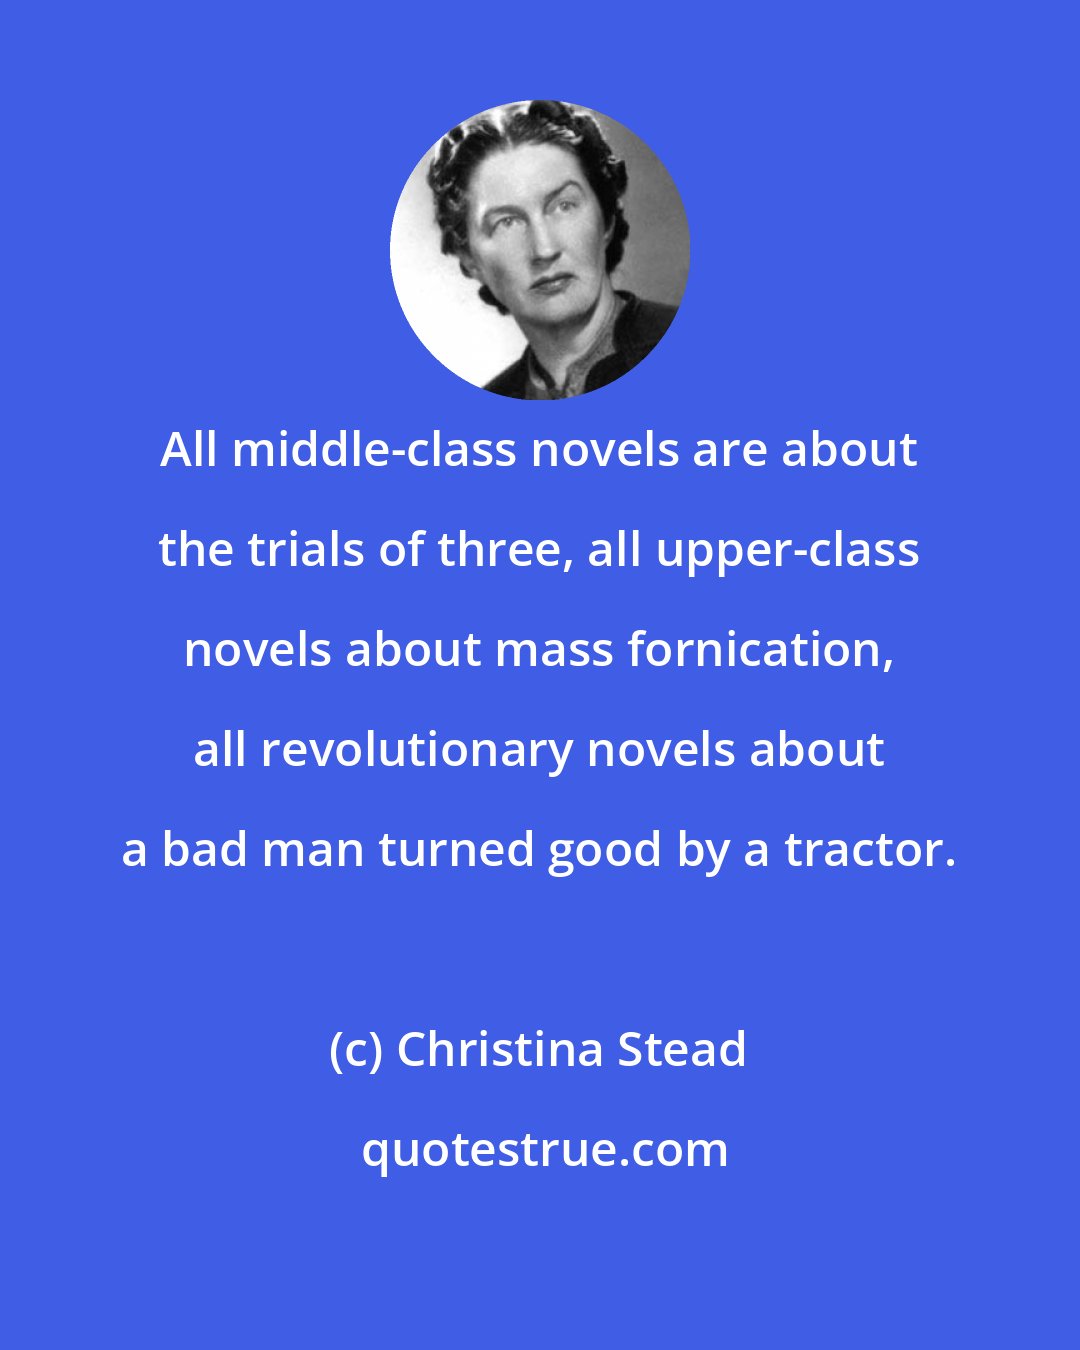 Christina Stead: All middle-class novels are about the trials of three, all upper-class novels about mass fornication, all revolutionary novels about a bad man turned good by a tractor.